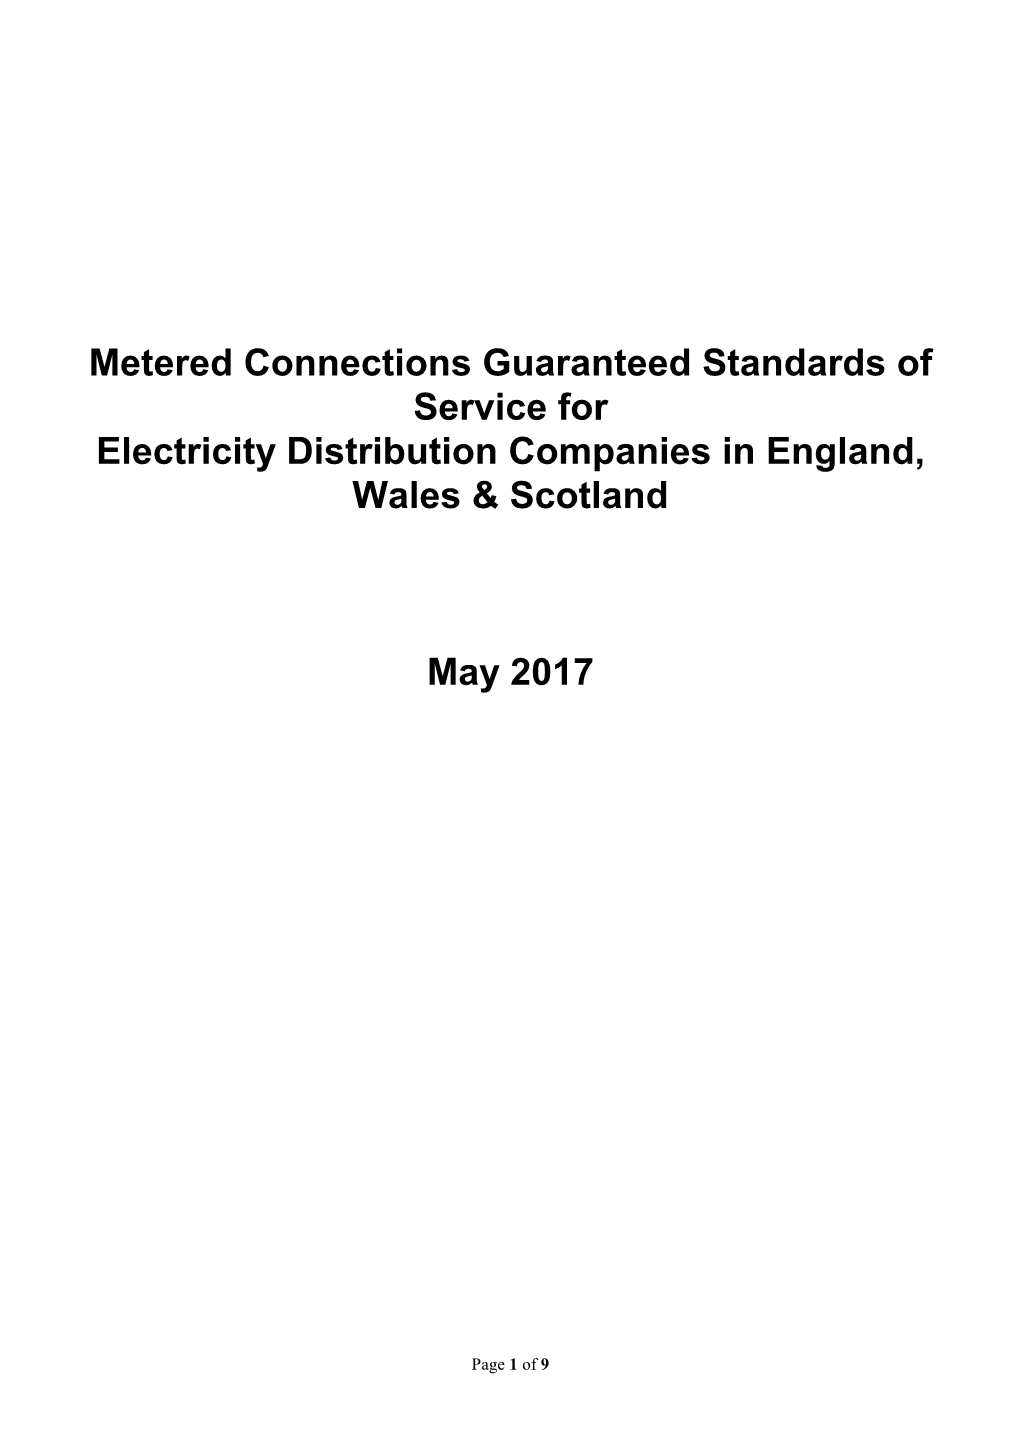 Metered Connections Guaranteed Standards of Service for Electricity Distribution Companies in England, Wales & Scotland May 2017